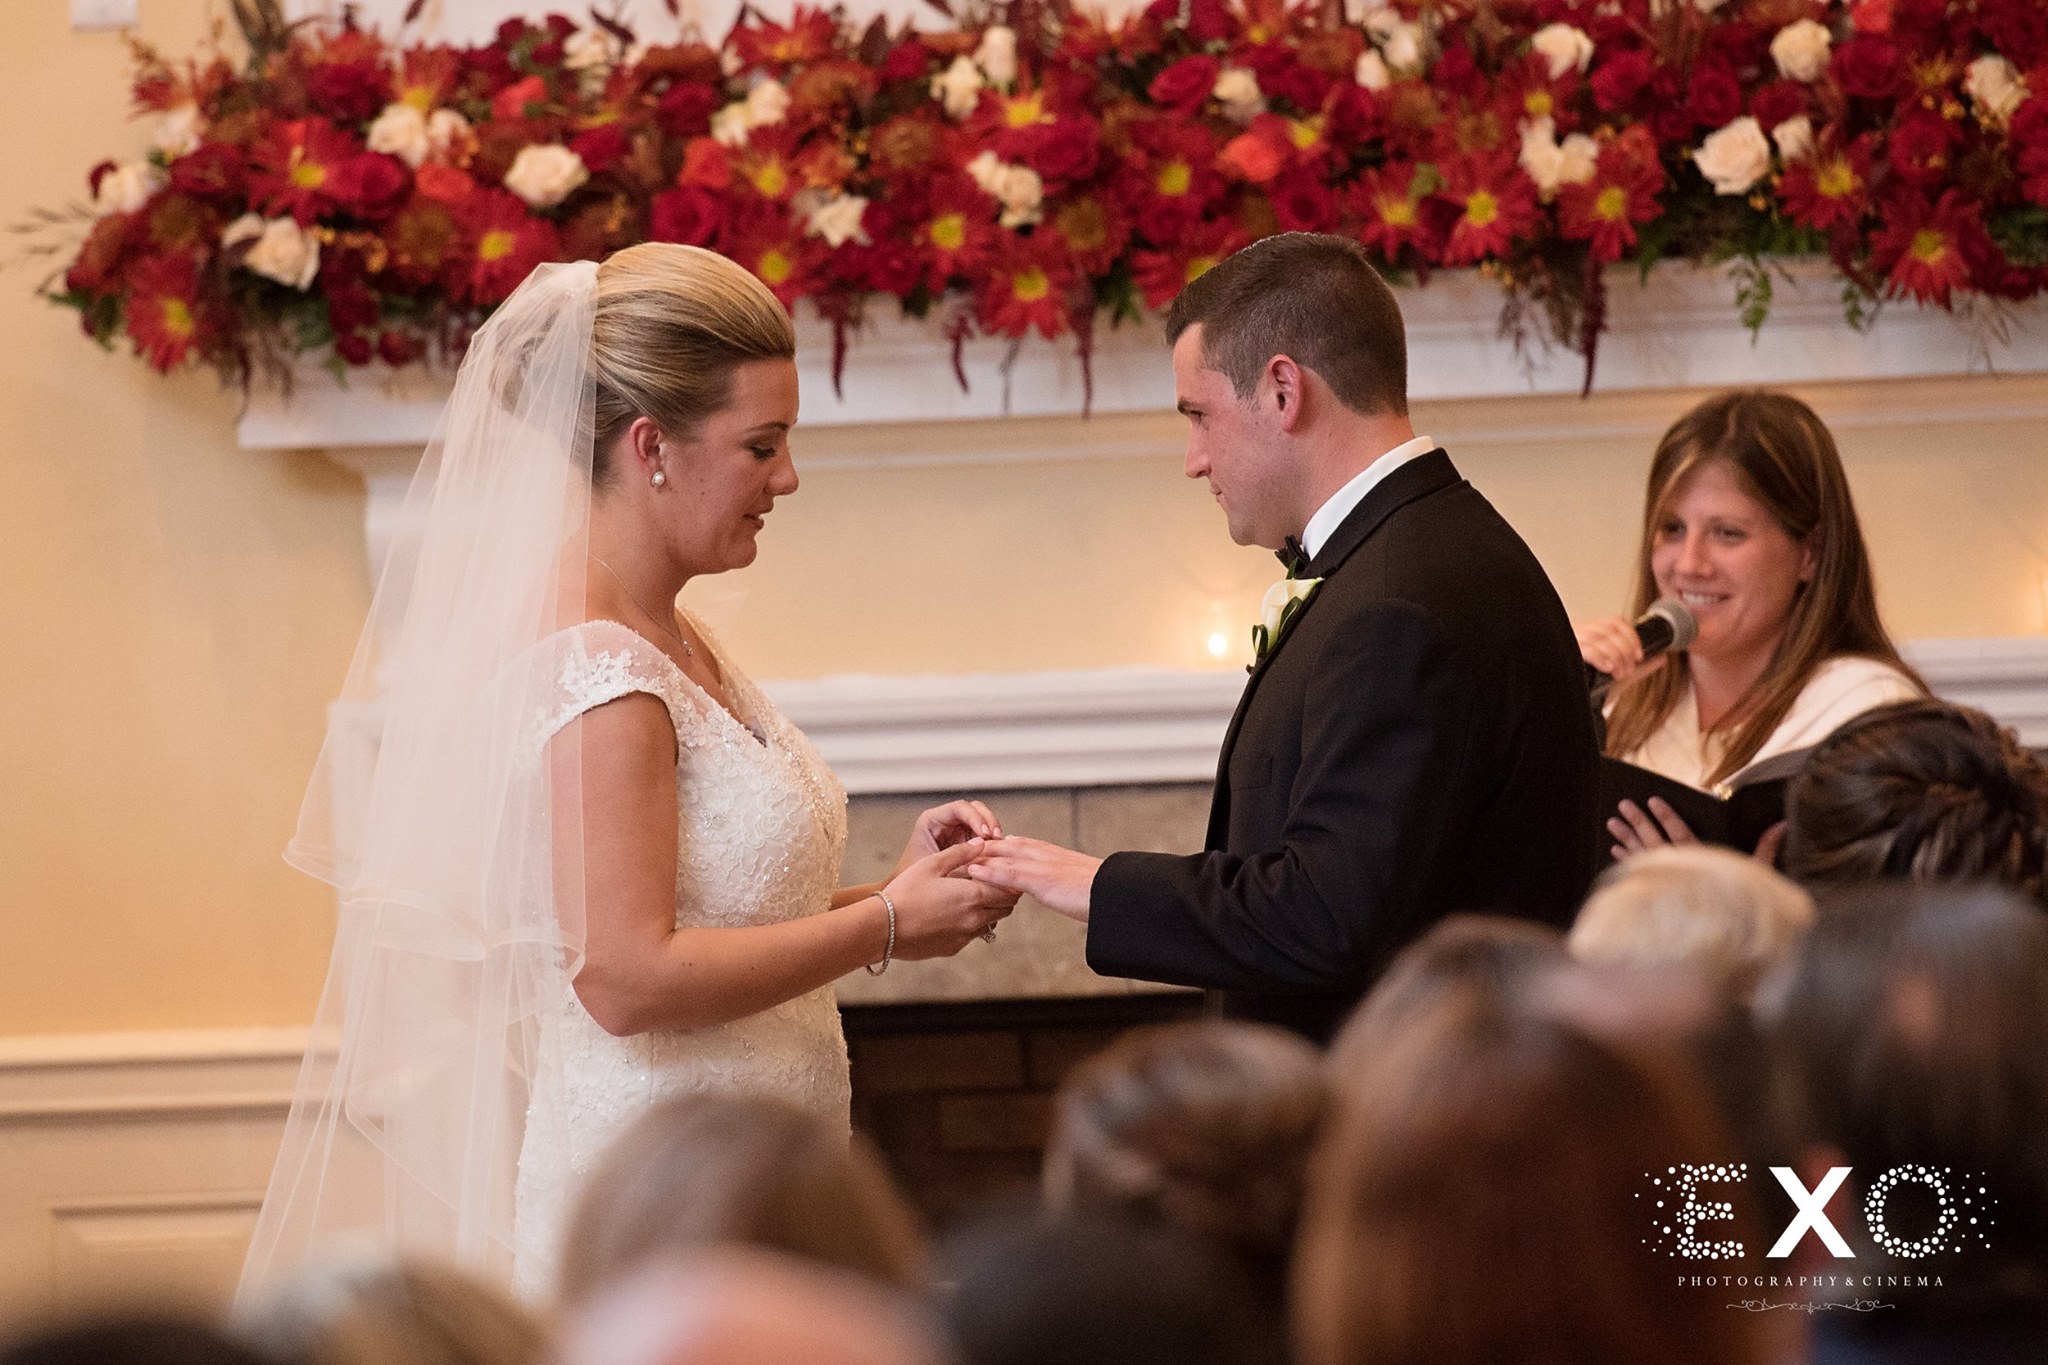 bride and groom exchanging coin galleries of oyster bay wedding rings at ceremony